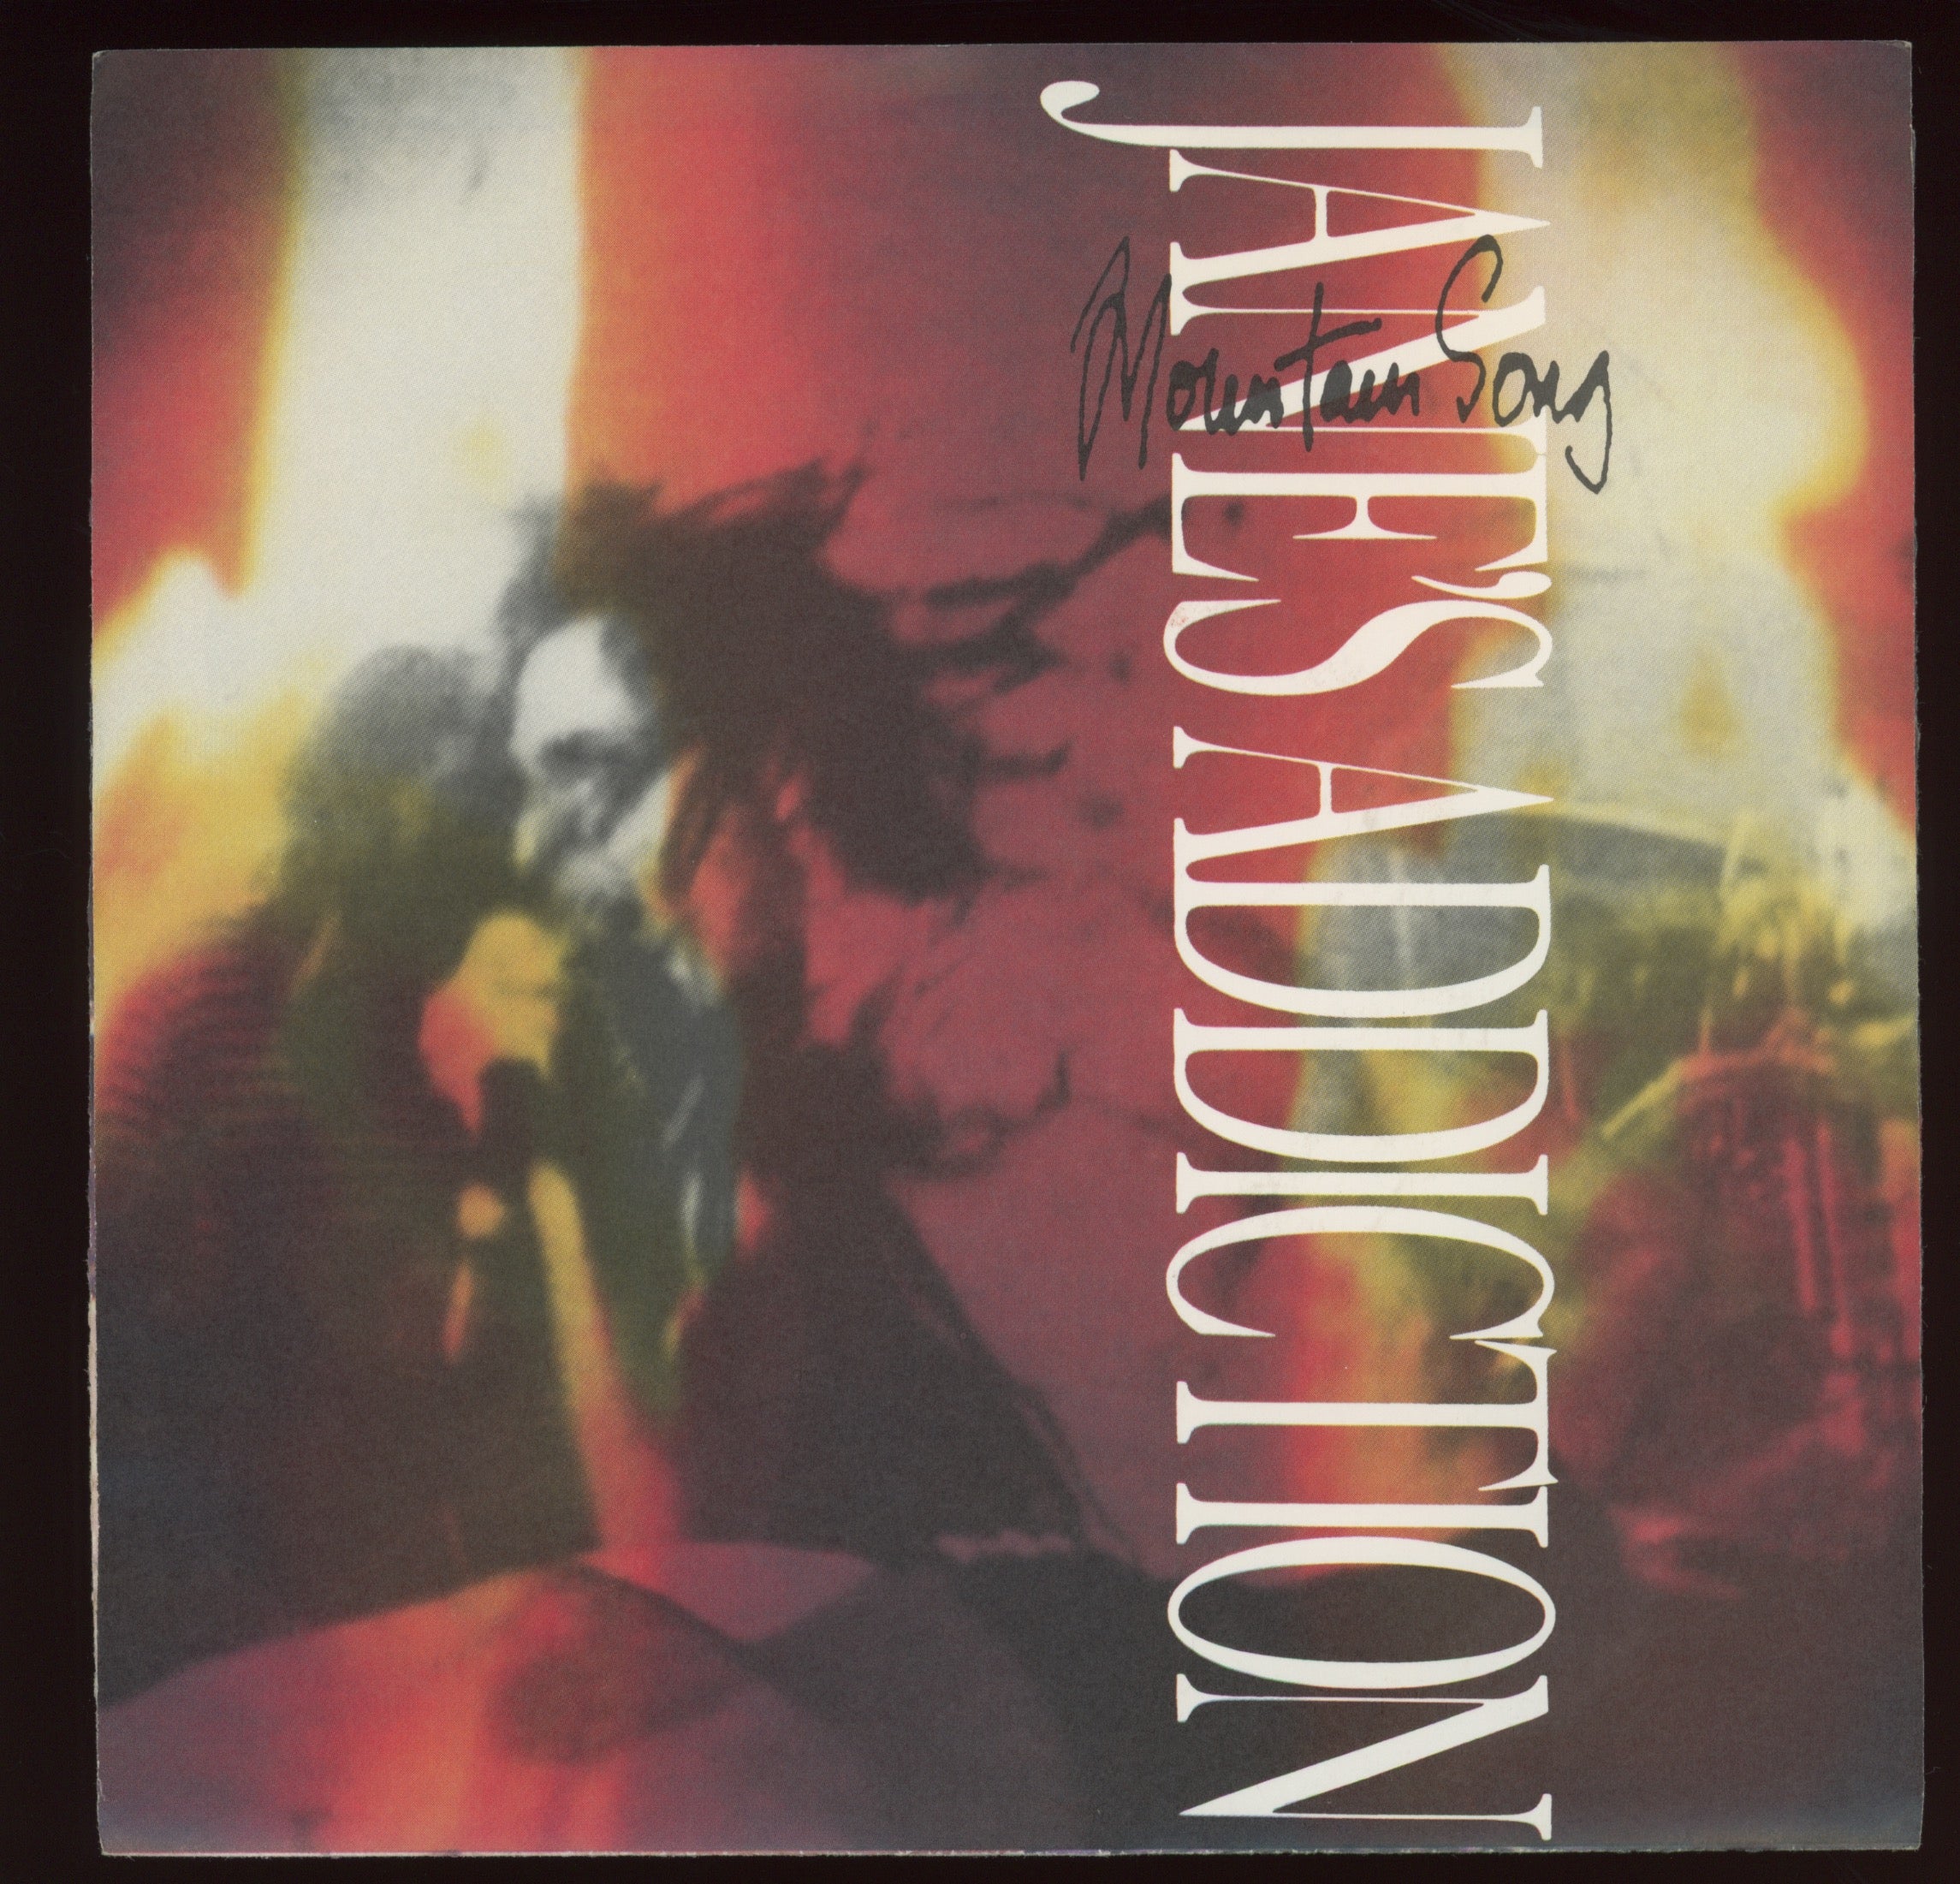 Jane's Addiction - Mountain Song on Warner Bros With Picture Sleeve